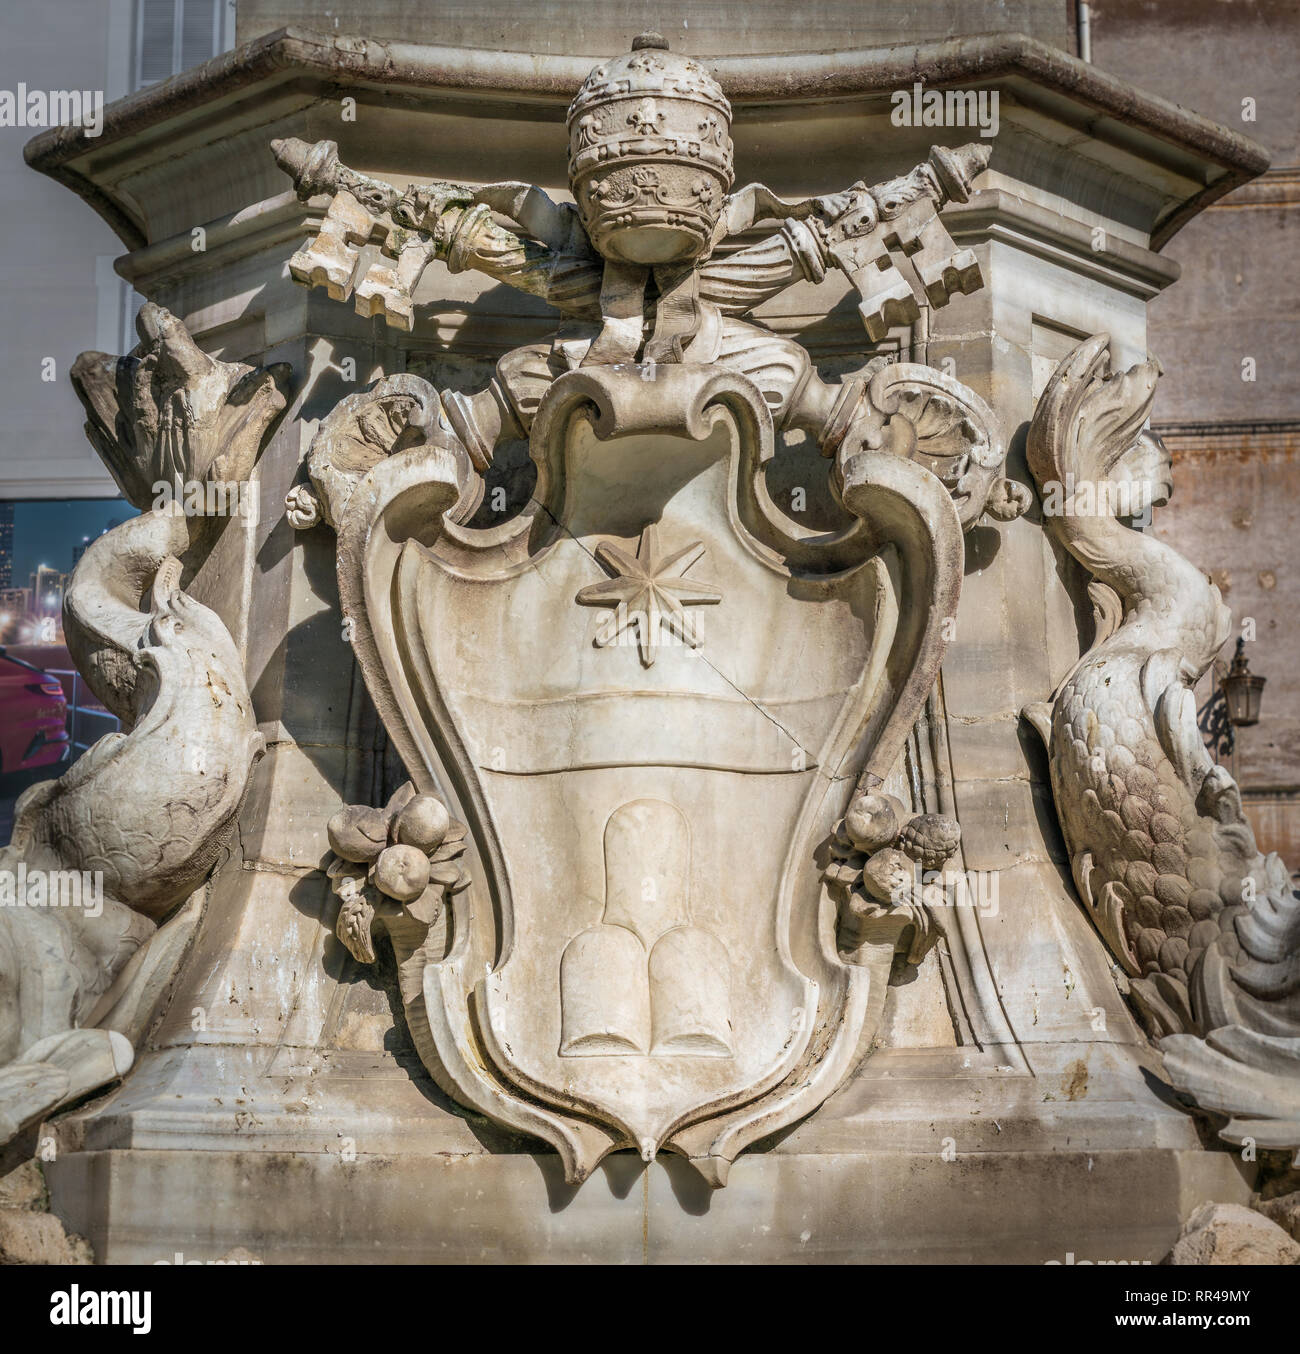 Pope Clement XI coat of arms in the Pantheon Fountain. Rome, Italy. Stock Photo